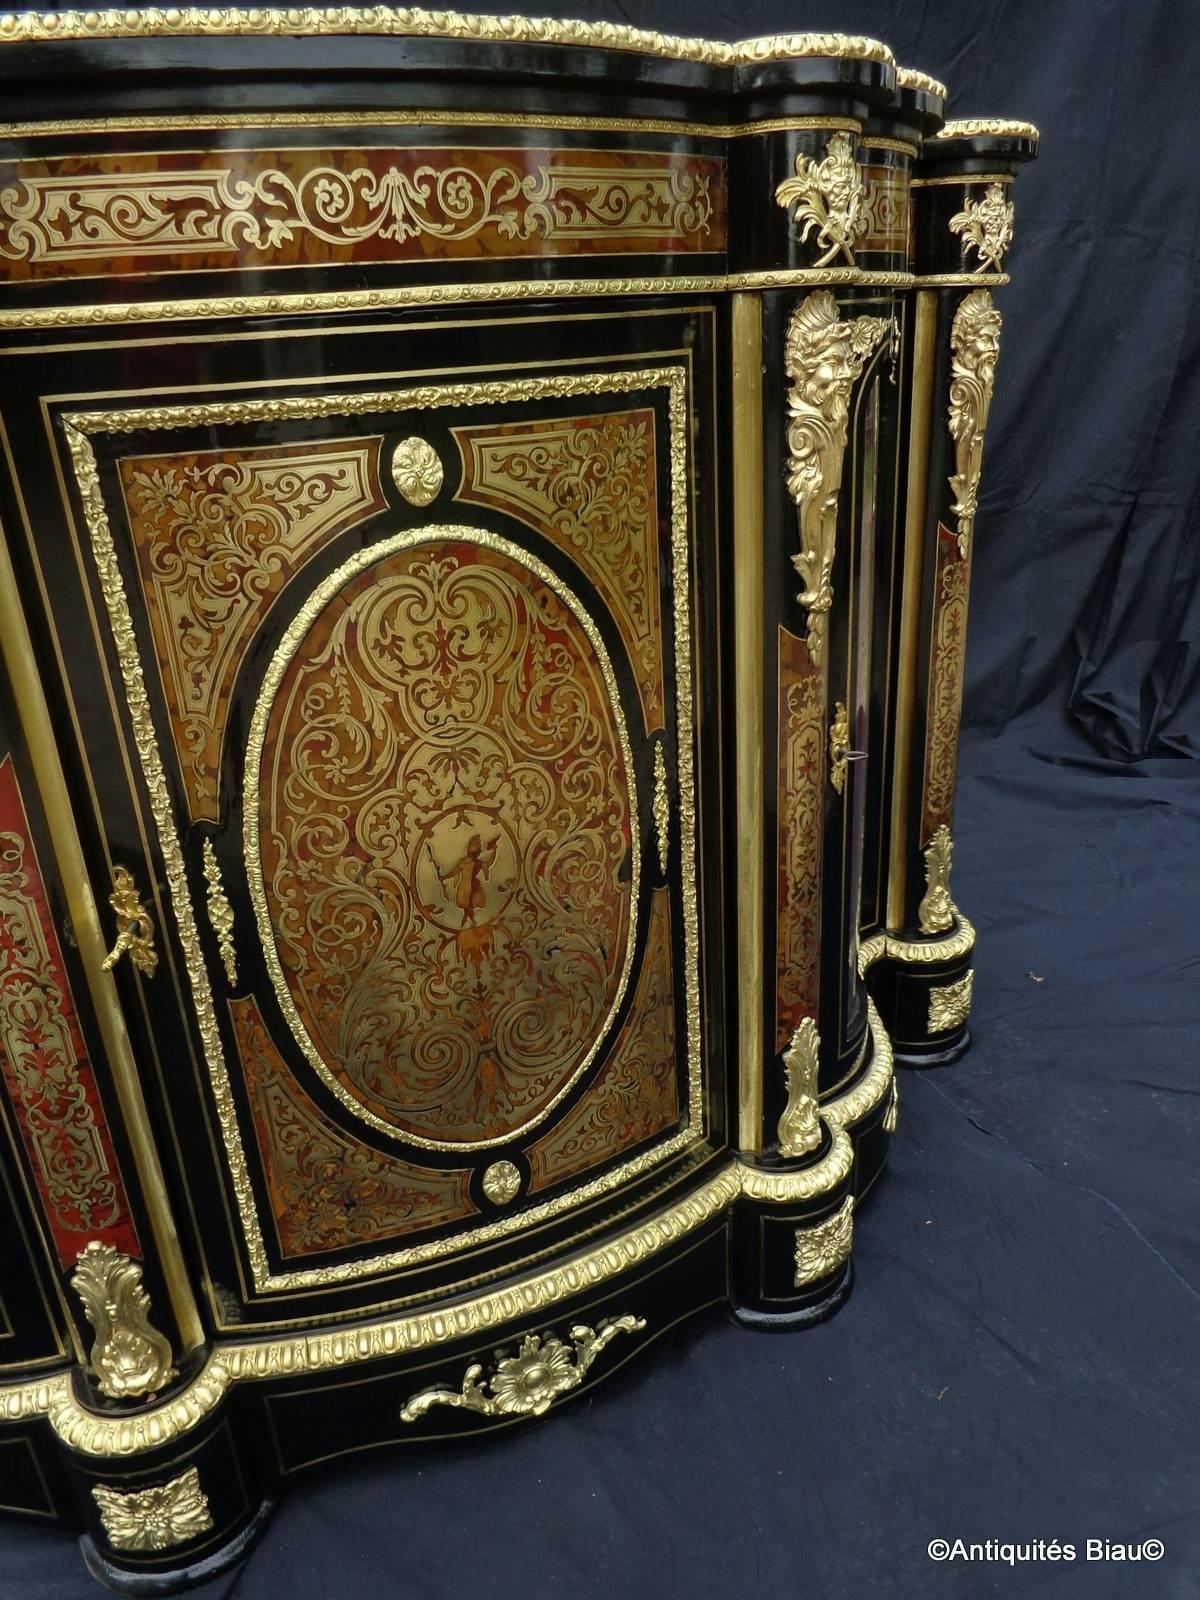 French credenza with three doors in Boulle marquetry - period Napoléon III.
A very impressive french credenza in Boulle marquetry, 
opening on three doors.
Beautiful ormolu caryatids.
Eventful glass doors, with old panes (of origins).
Velvet